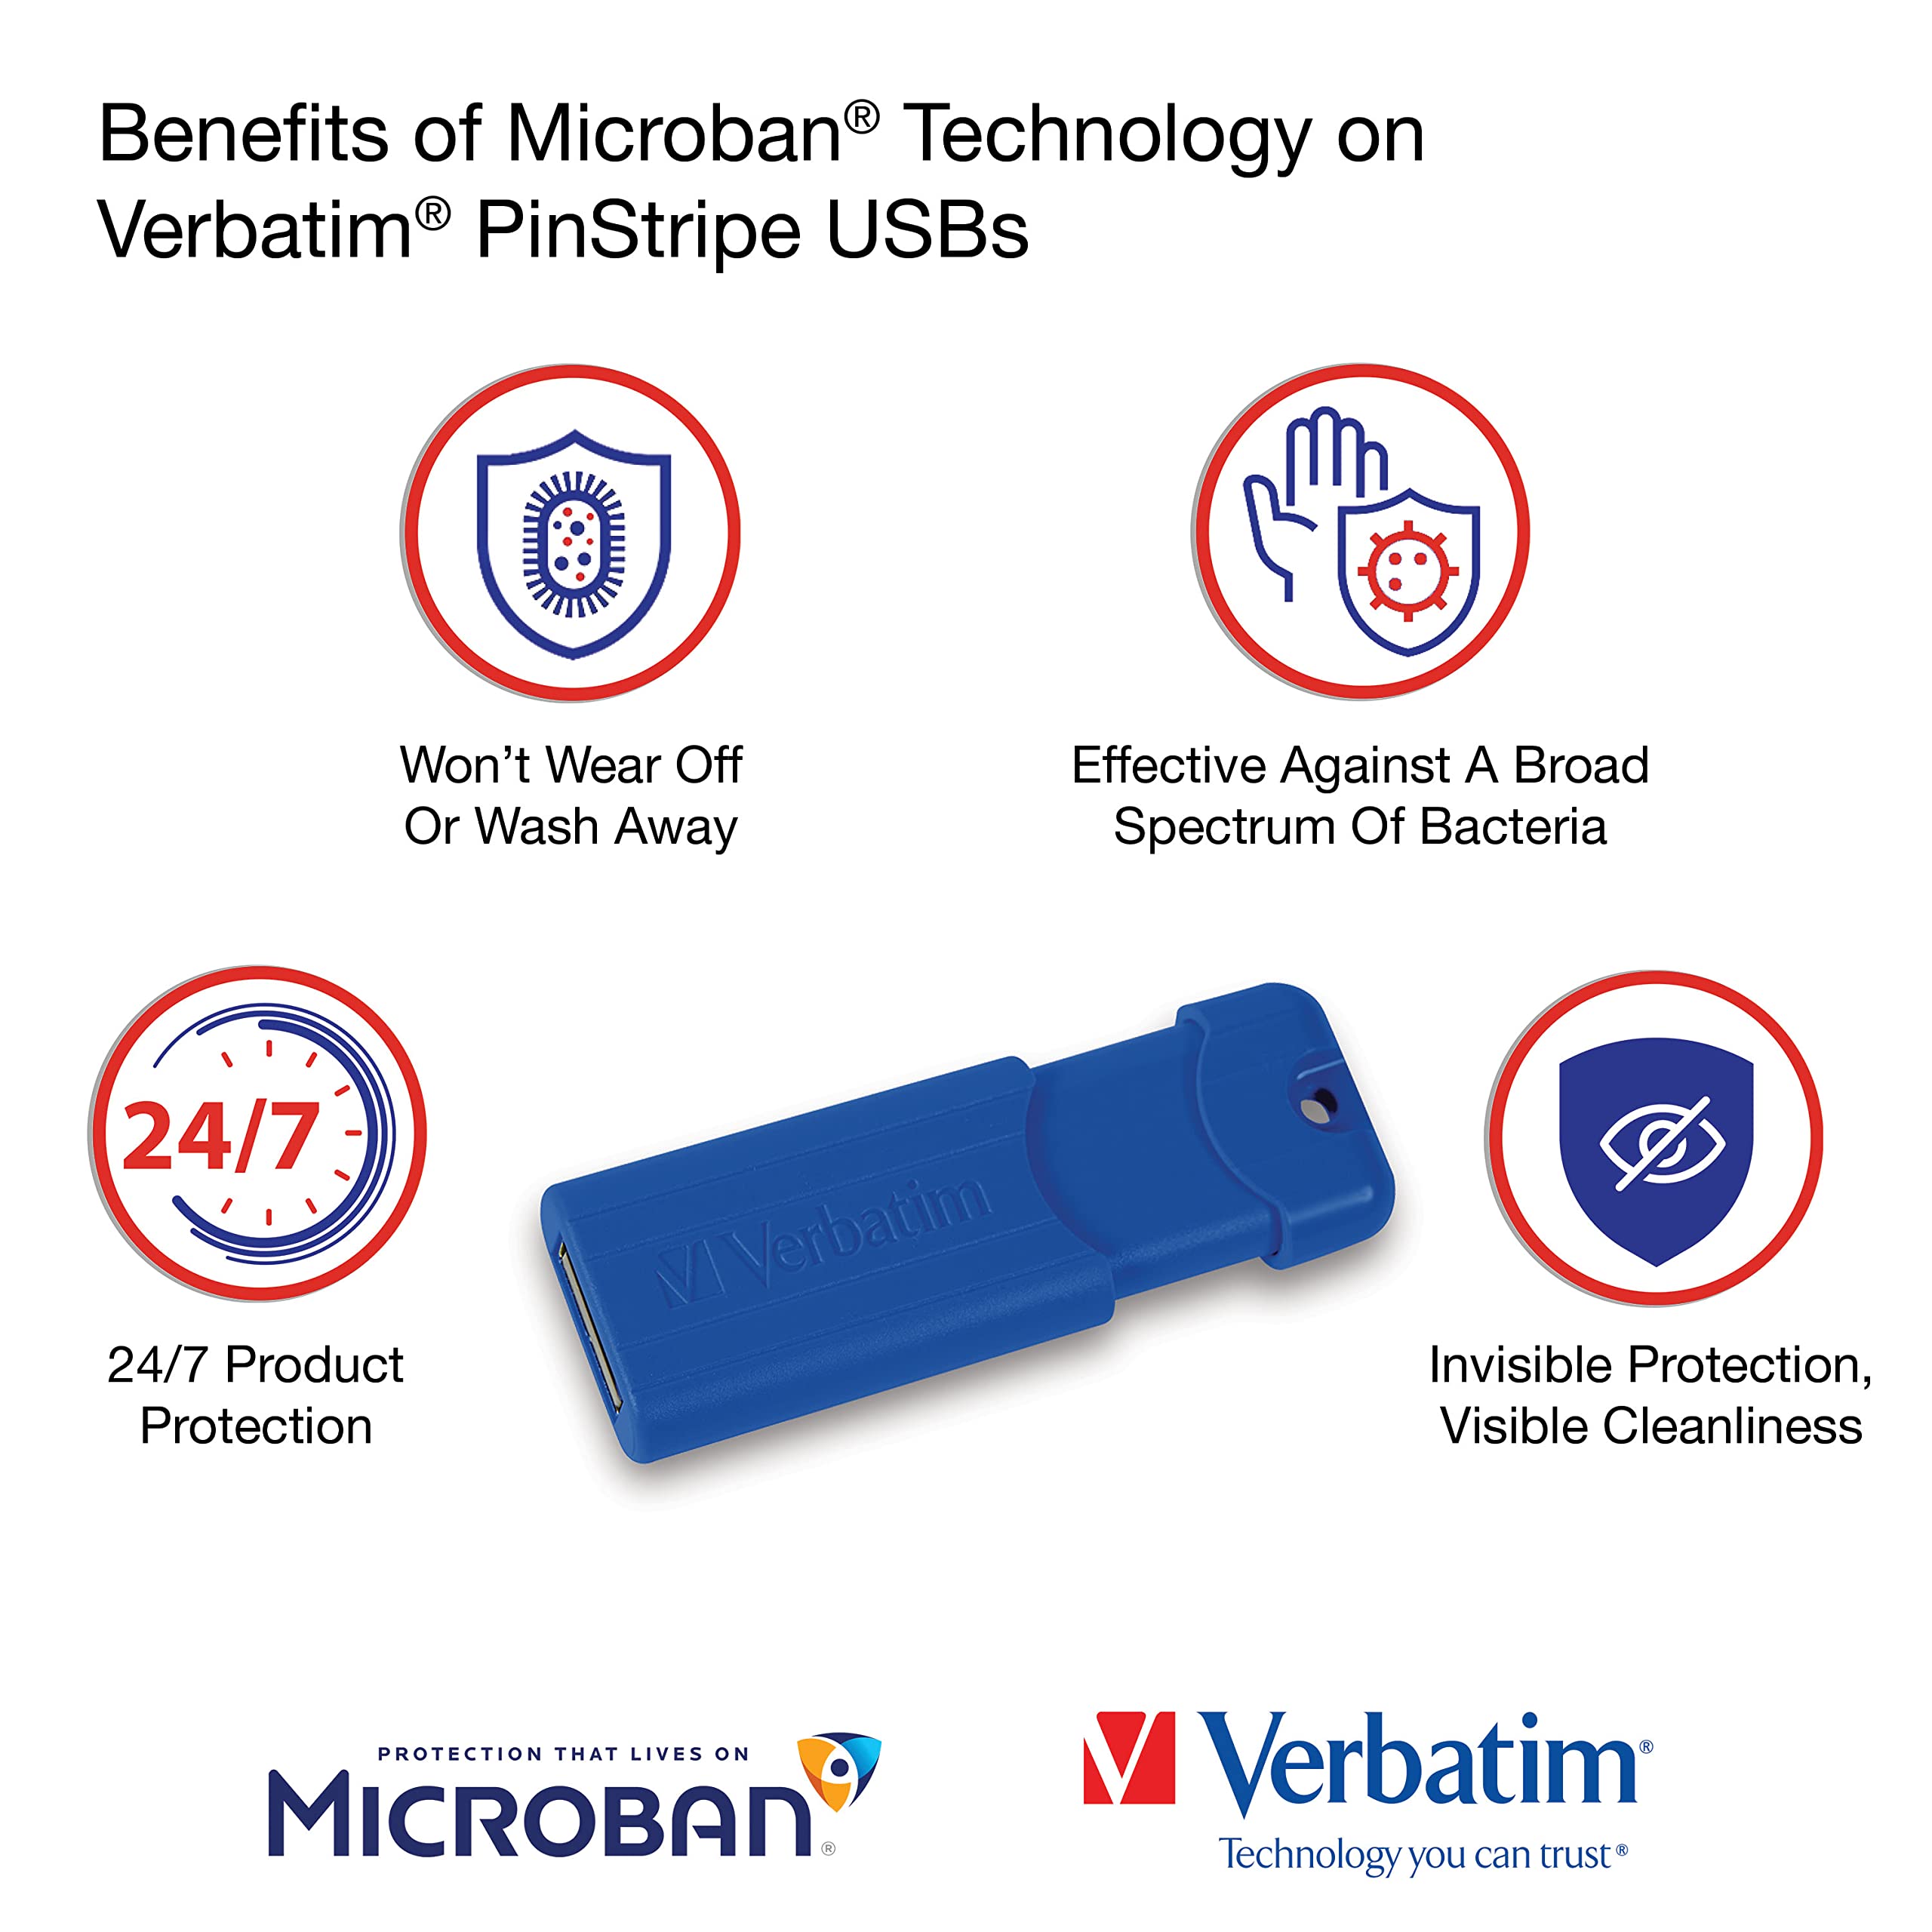 Verbatim 64GB Pinstripe USB 3.2 Gen 1 Flash Drive Retractable Thumb Drive with Microban Antimicrobial Product Protection- 5 Pack - Multicolor (Green, Blue, Red, Purple, Cyan)